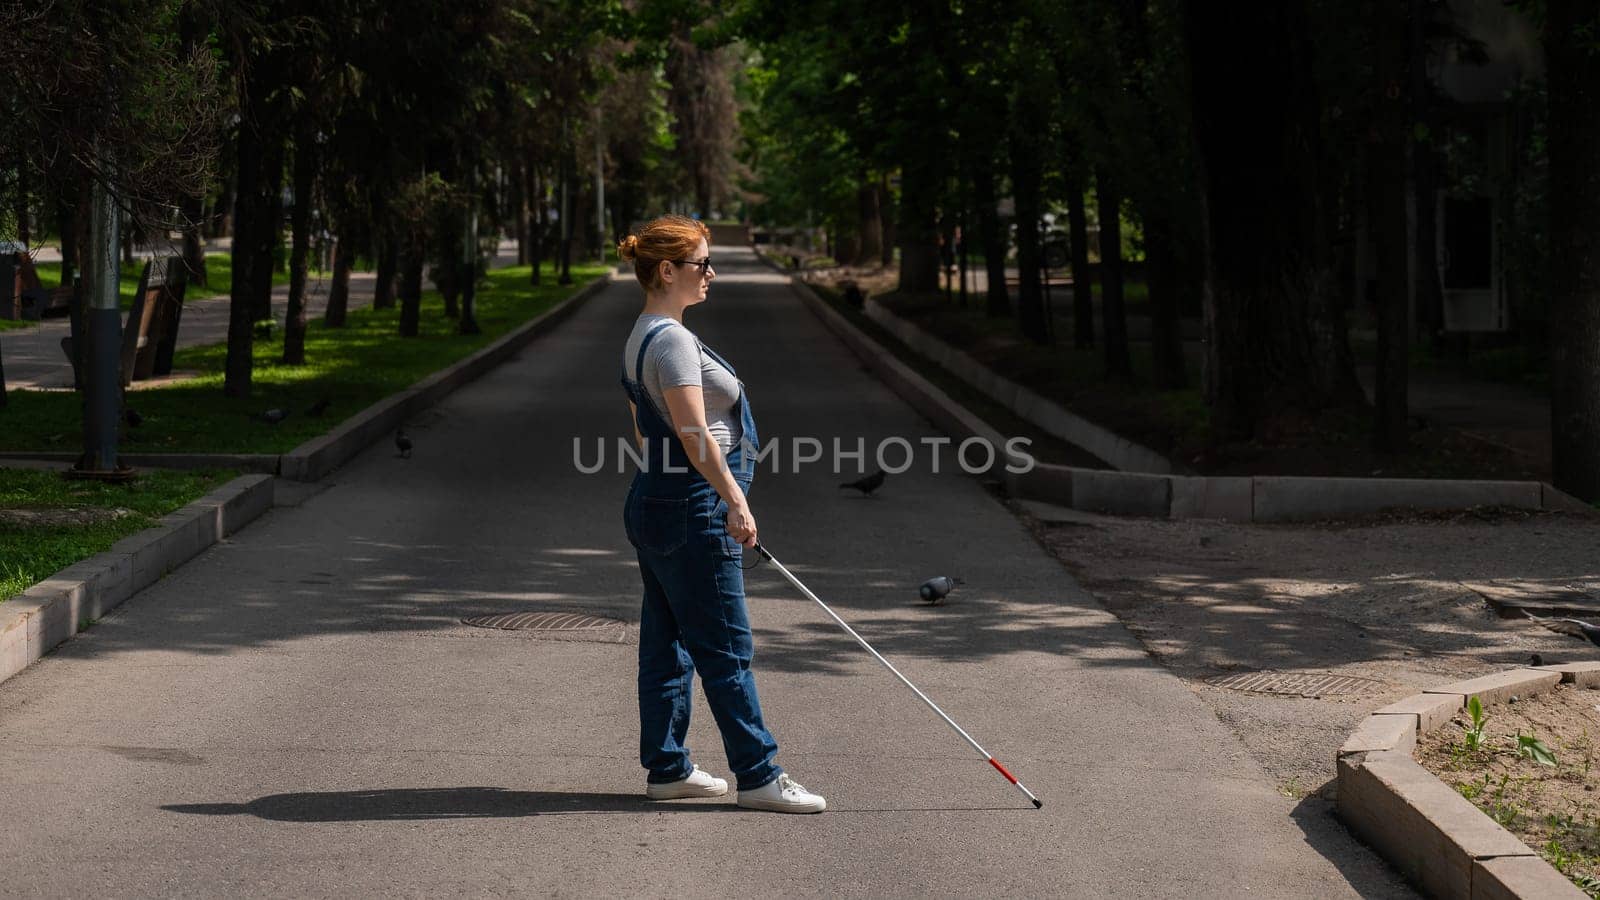 Blind pregnant woman crosses the street with the help of a tactile cane